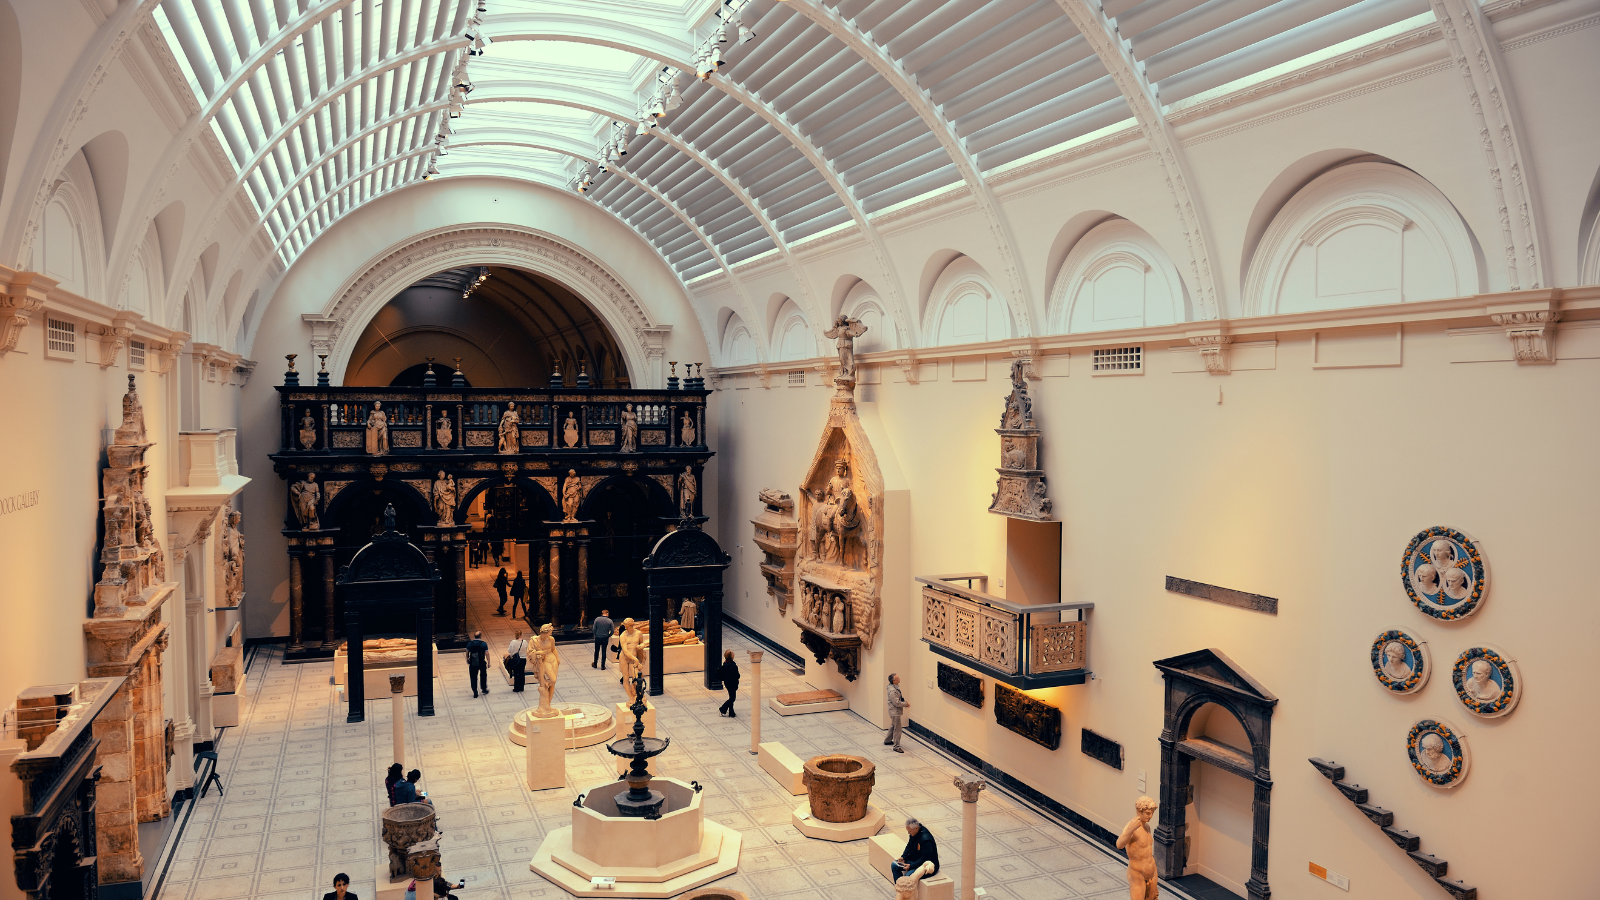 The interior of the Victoria and Albert Museum in London.